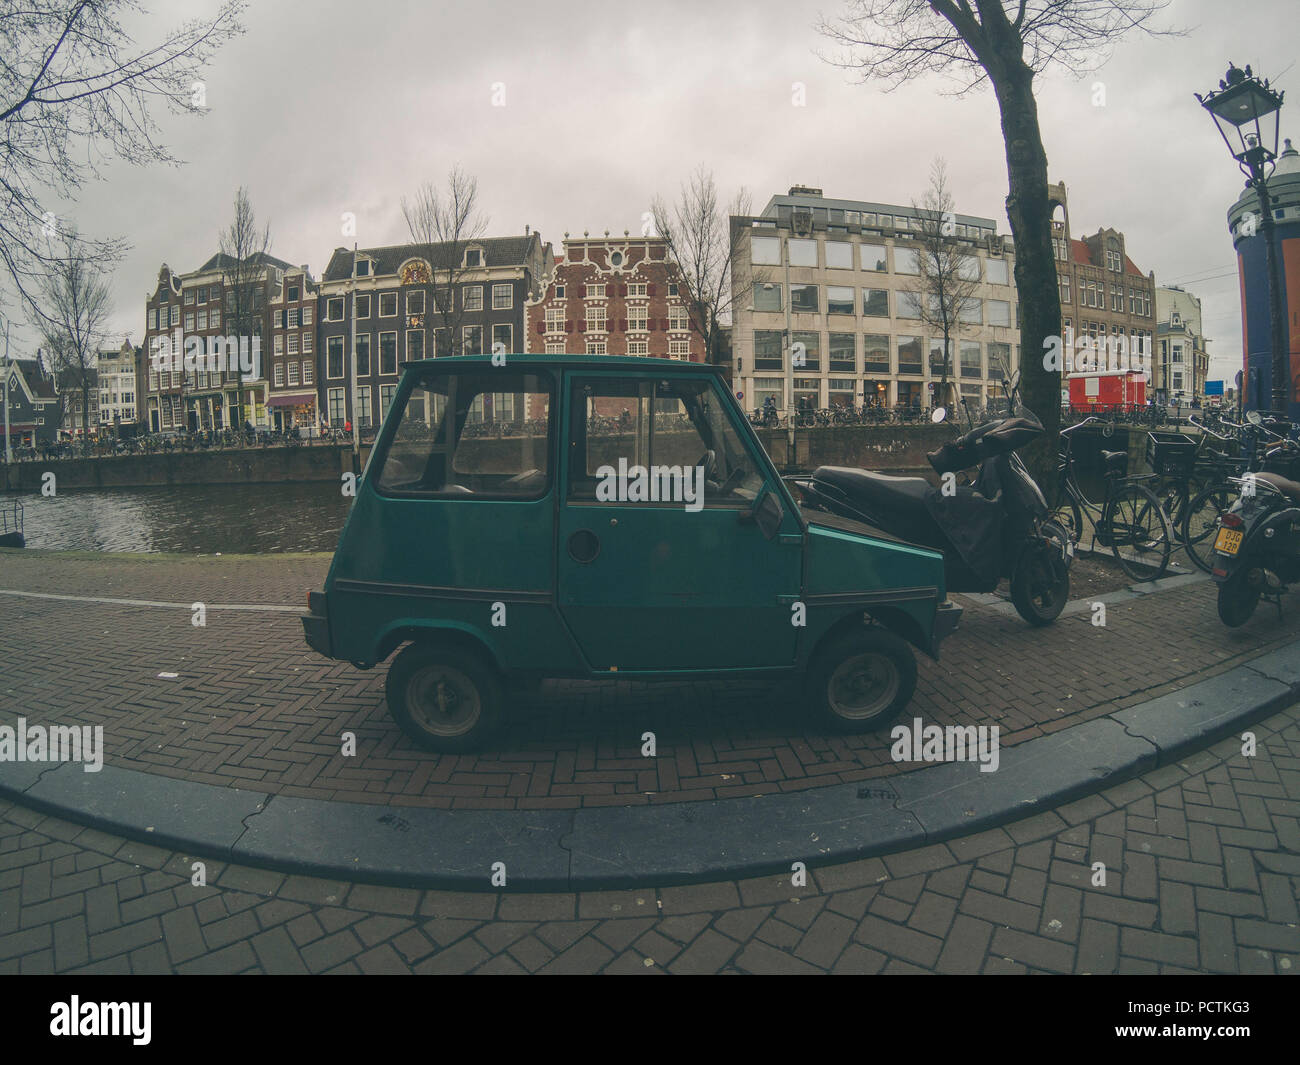 Tiny green car parked on Amsterdam streets Stock Photo